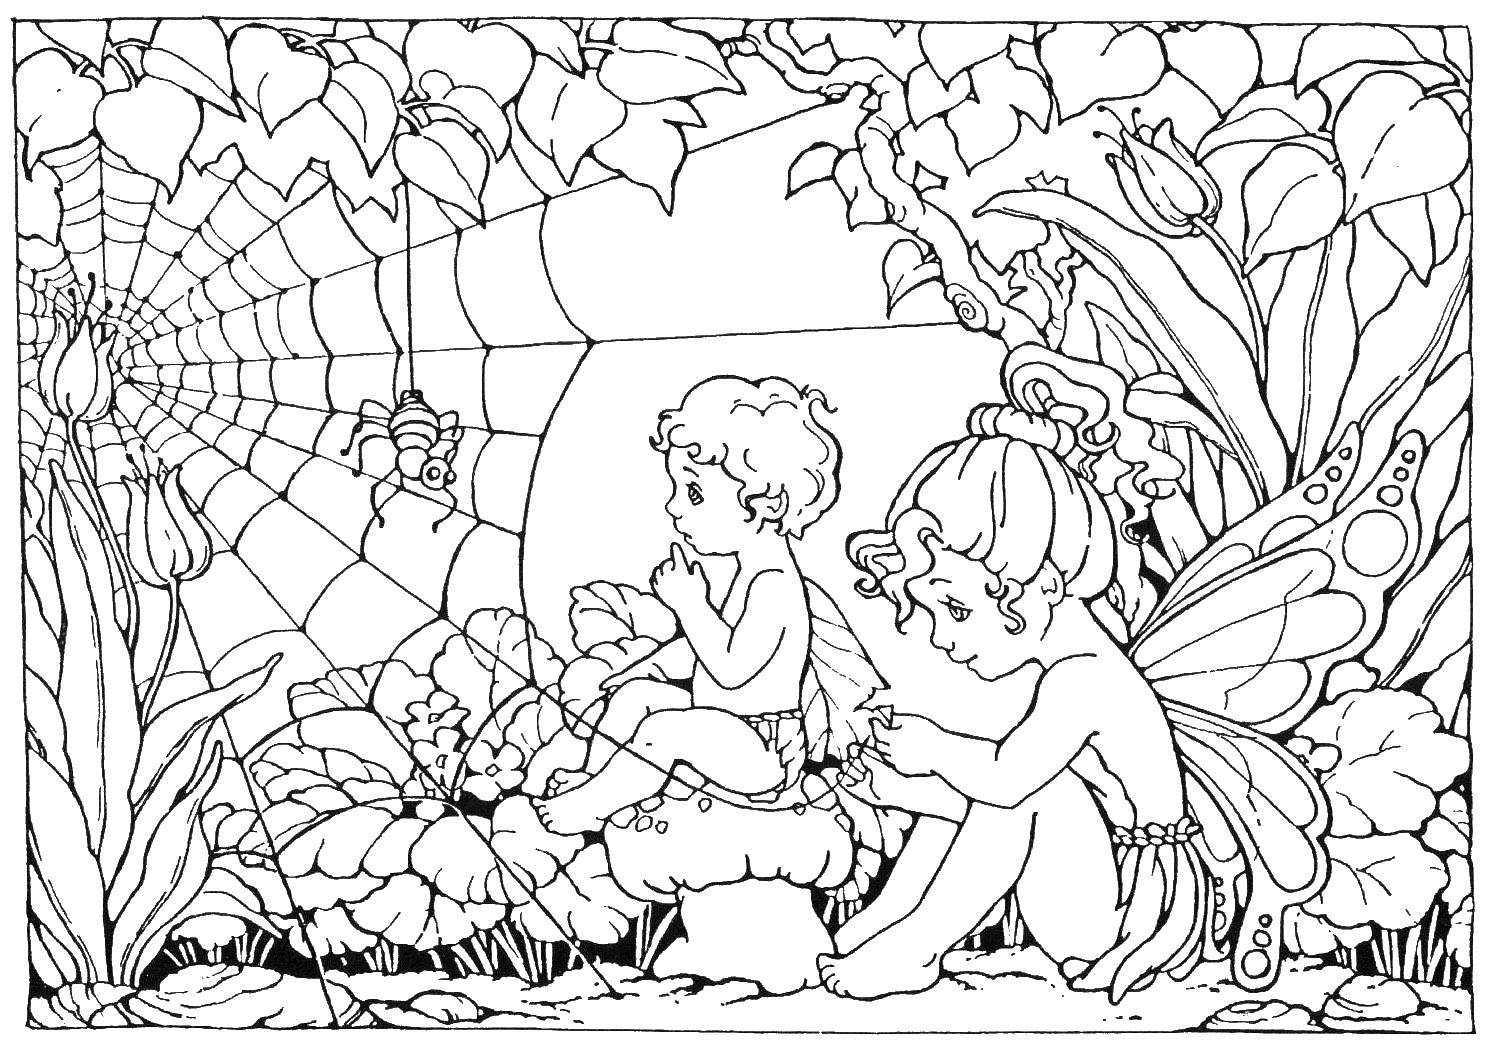 Coloring Fairies. Category Fantasy. Tags:  fairies, kids, girls, wings.